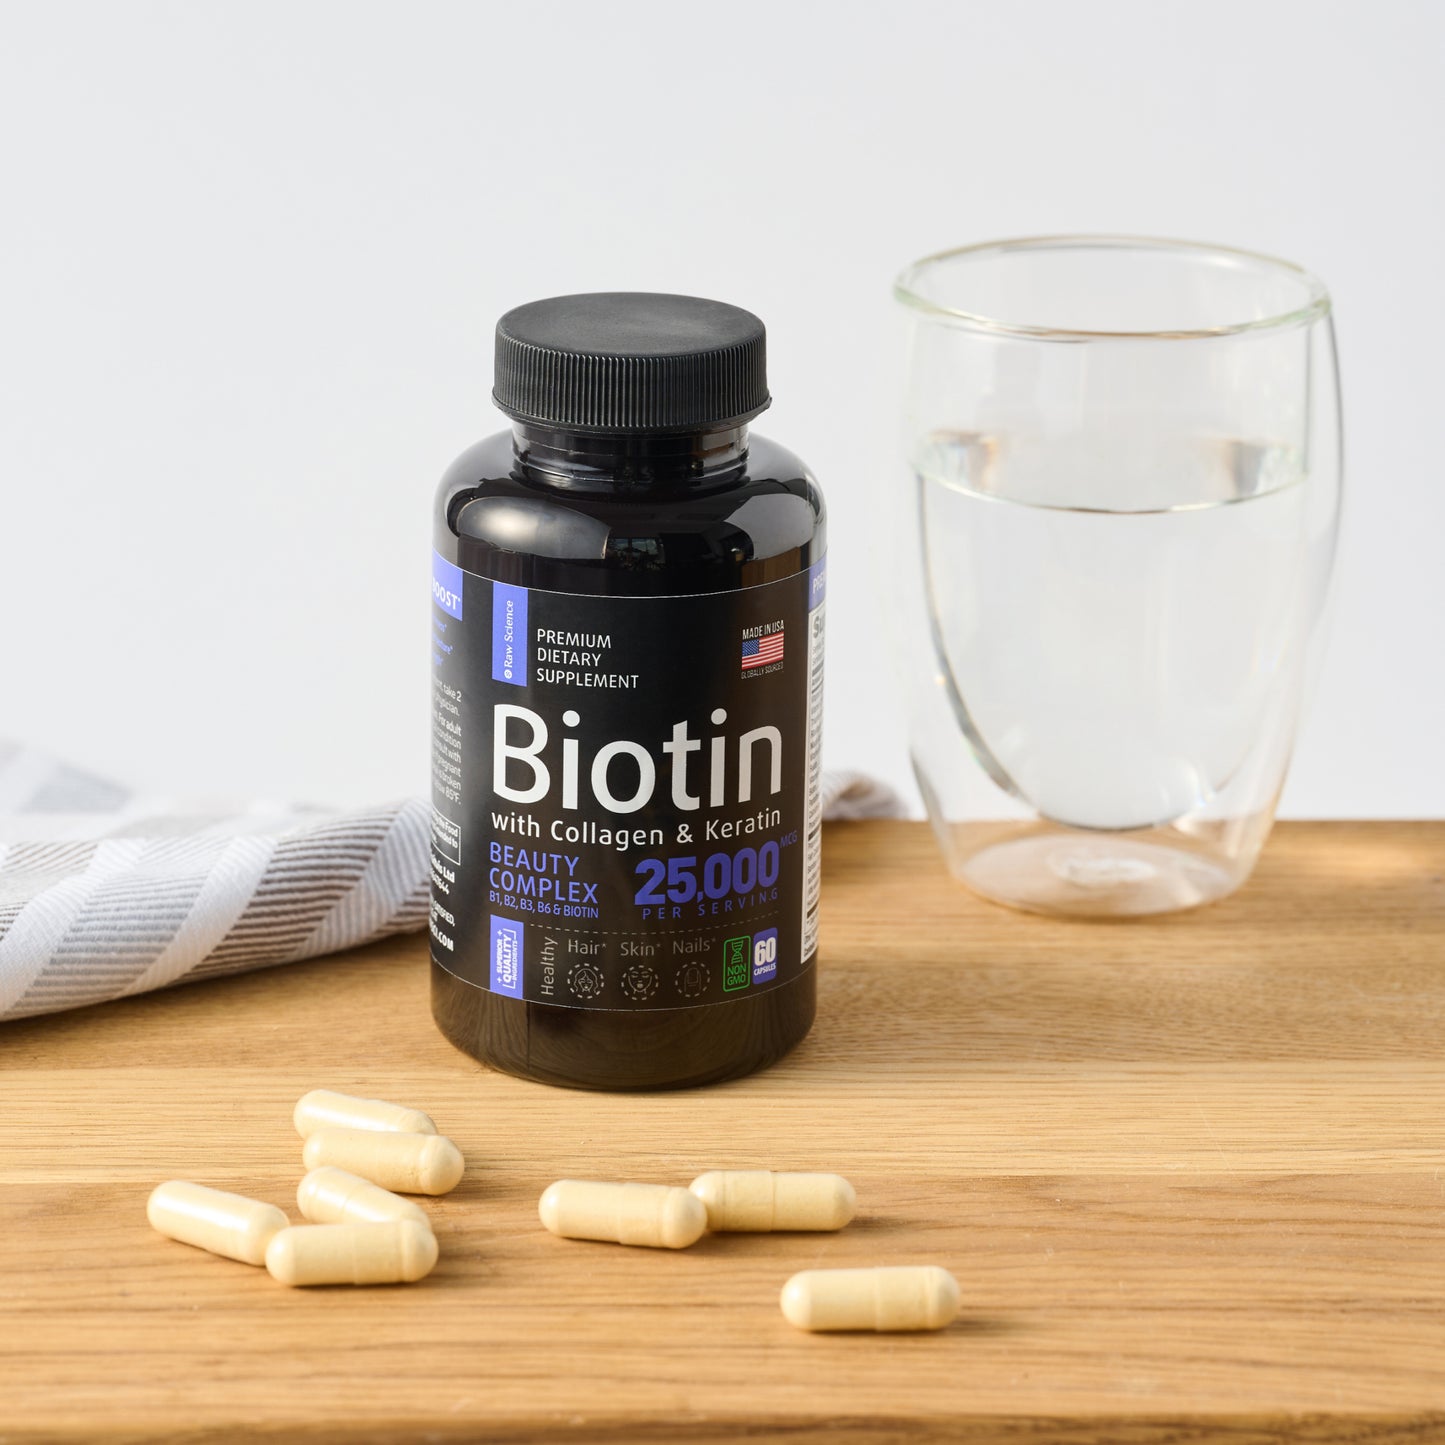 Biotin with Collagen and Keratin Capsules Buy 3 Get 1 Free